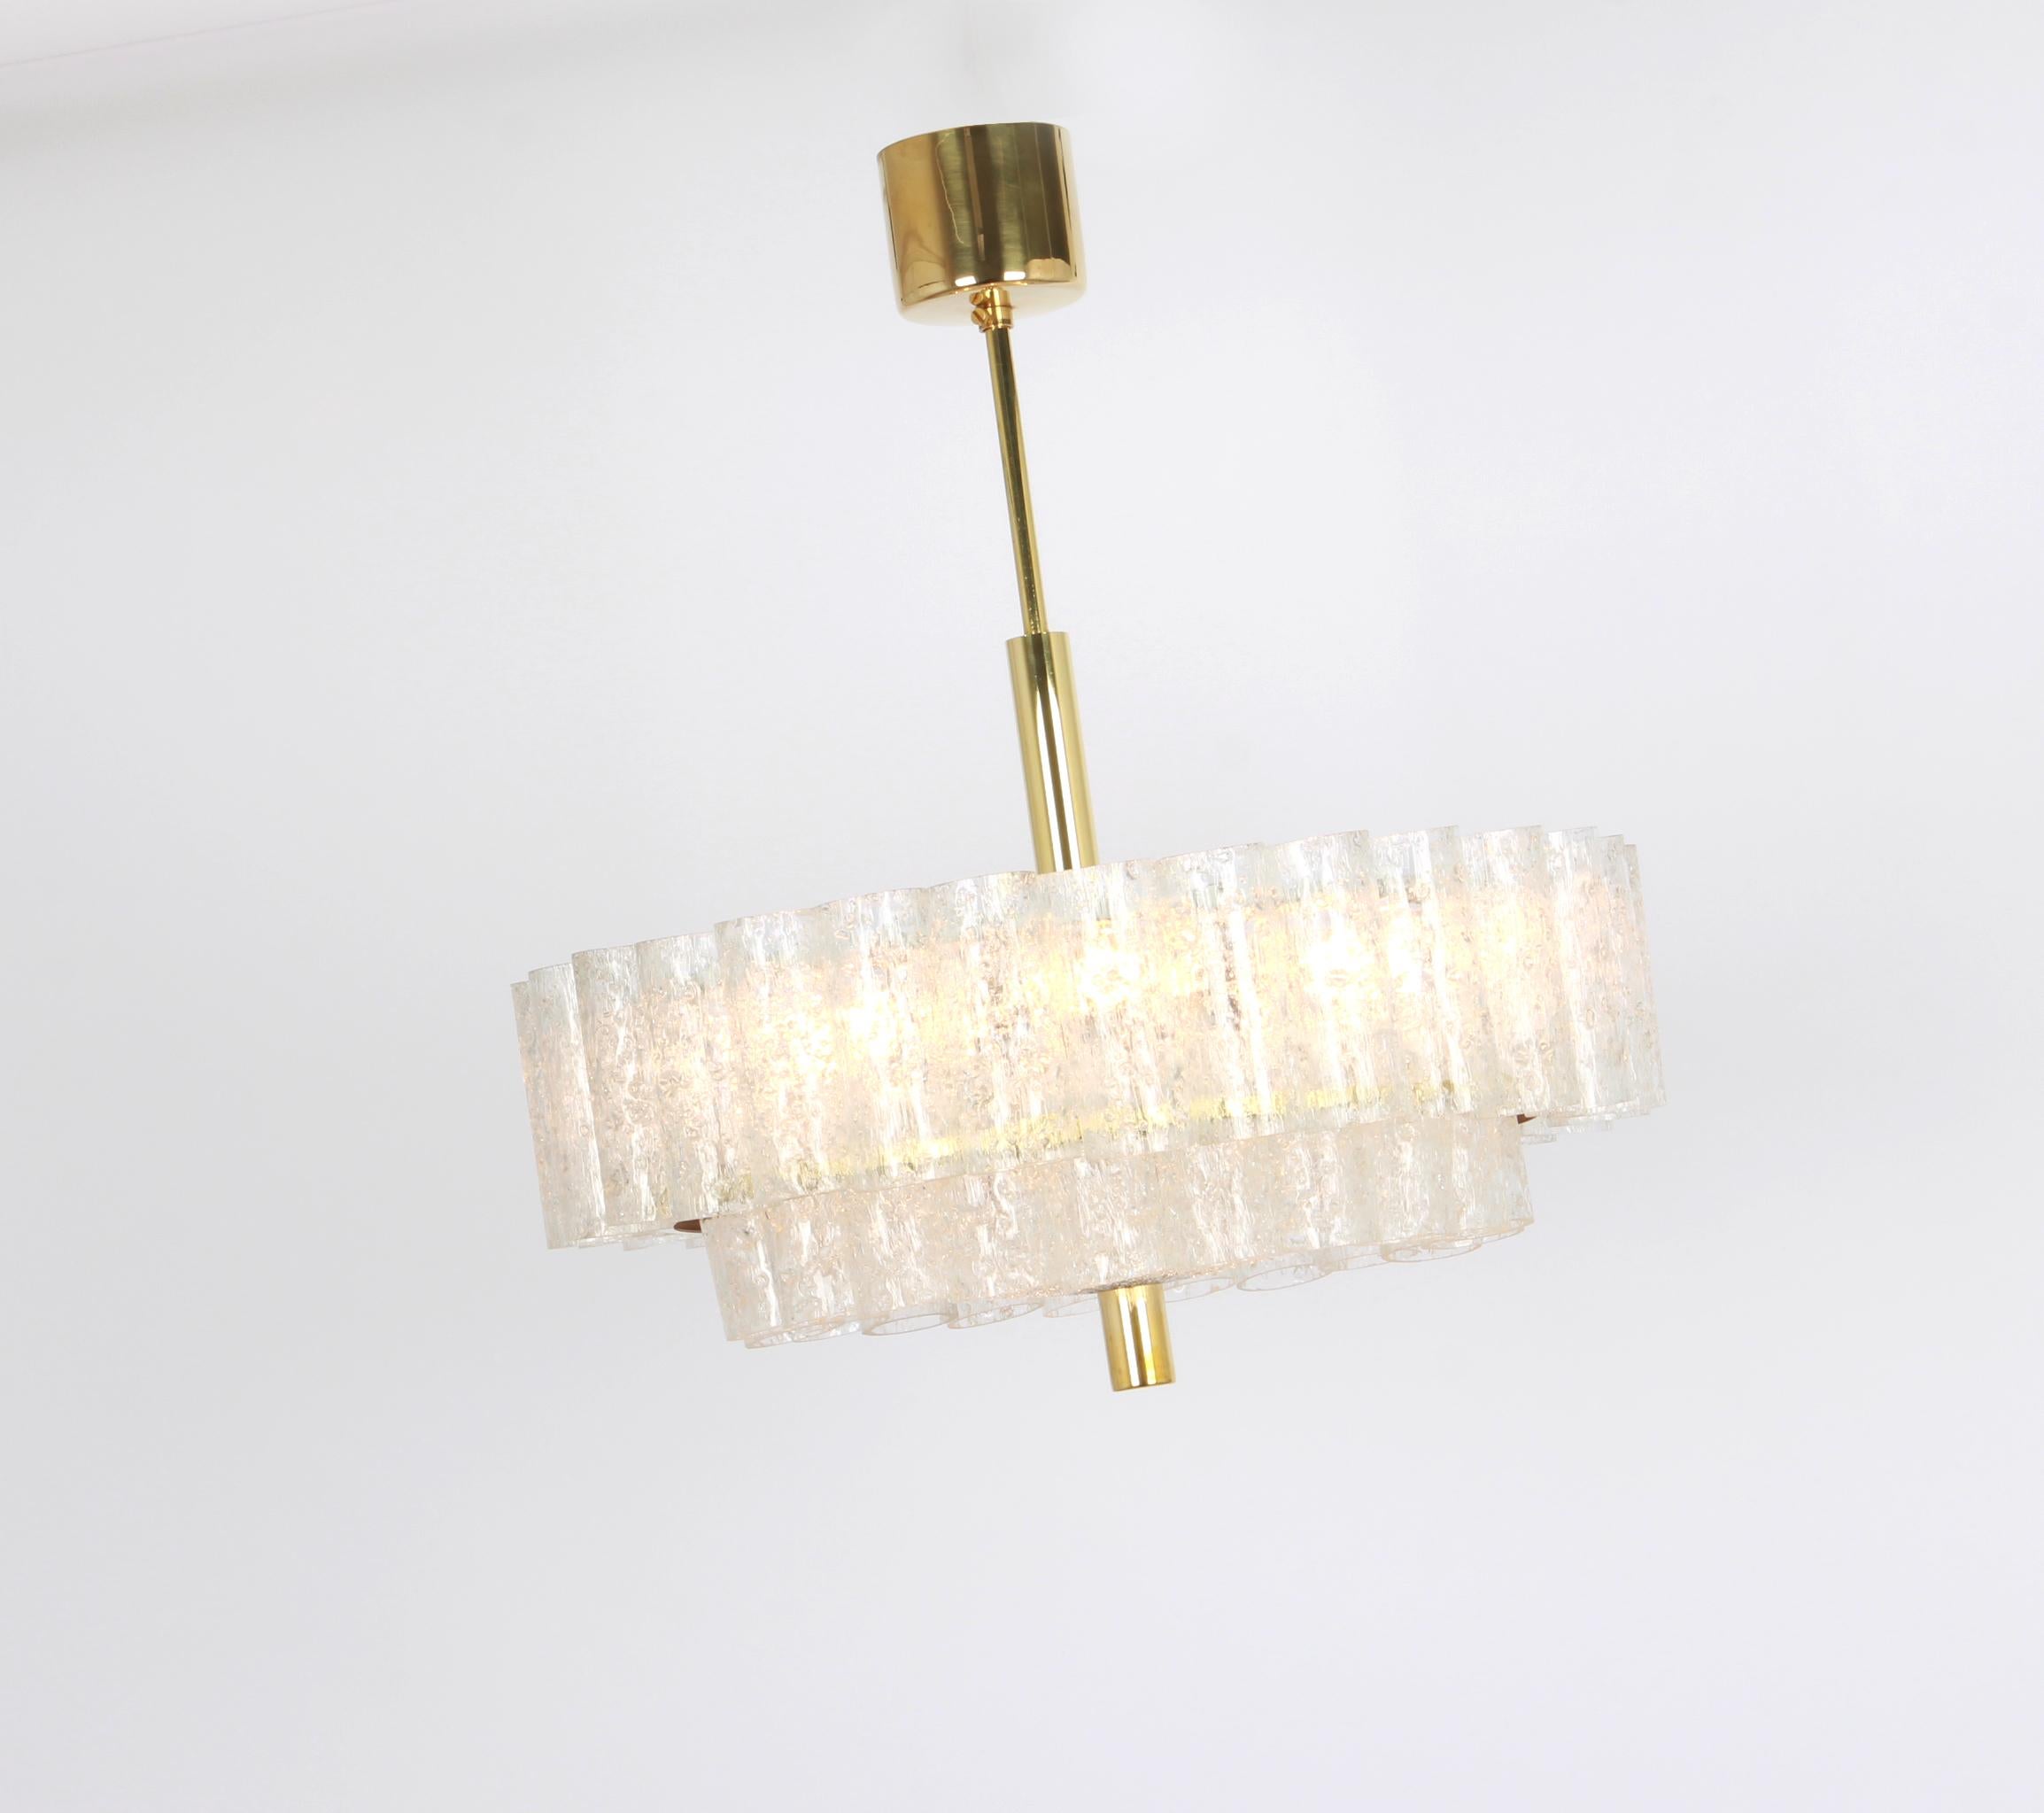 1 of 2 Stunning Murano Ice Glass Tubes Chandelier by Doria, Germany, 1960s For Sale 1